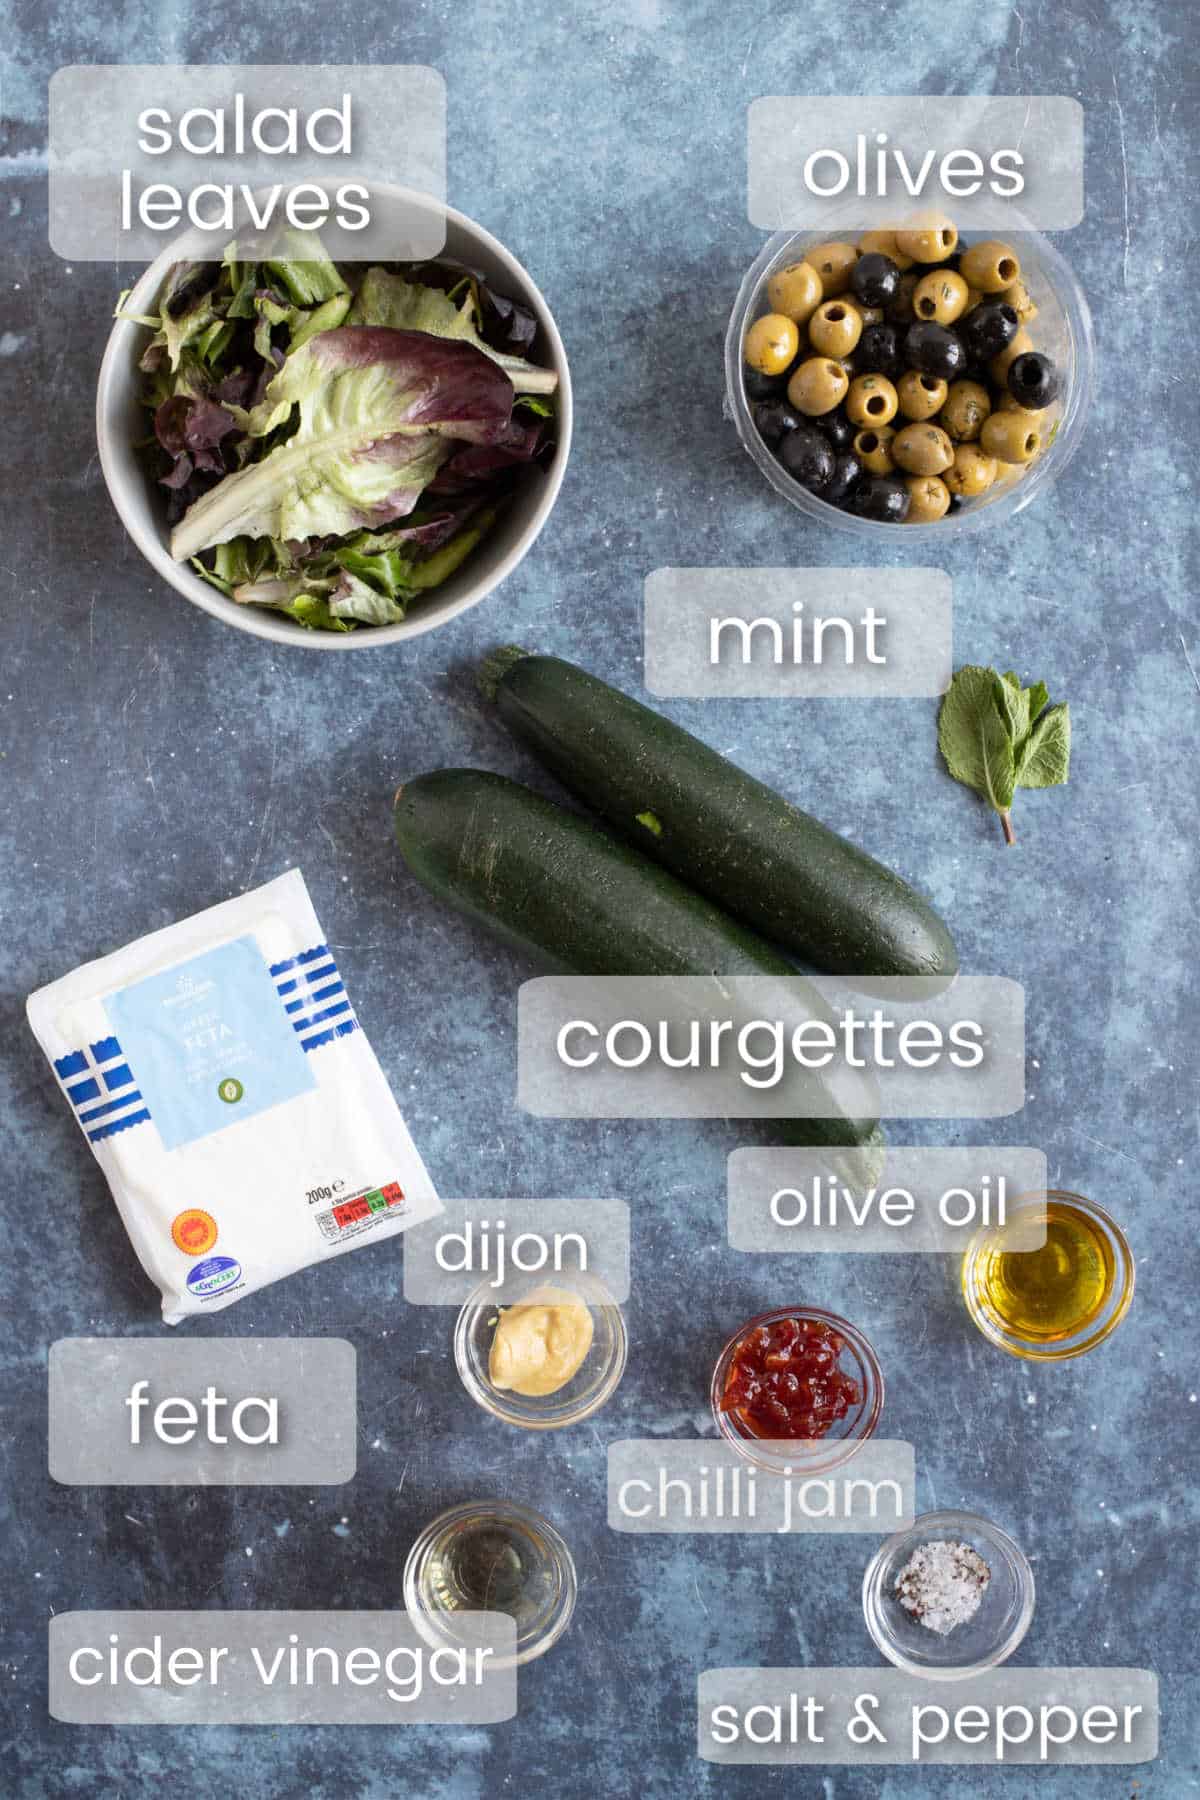 Ingredients needed for courgette feta salad.